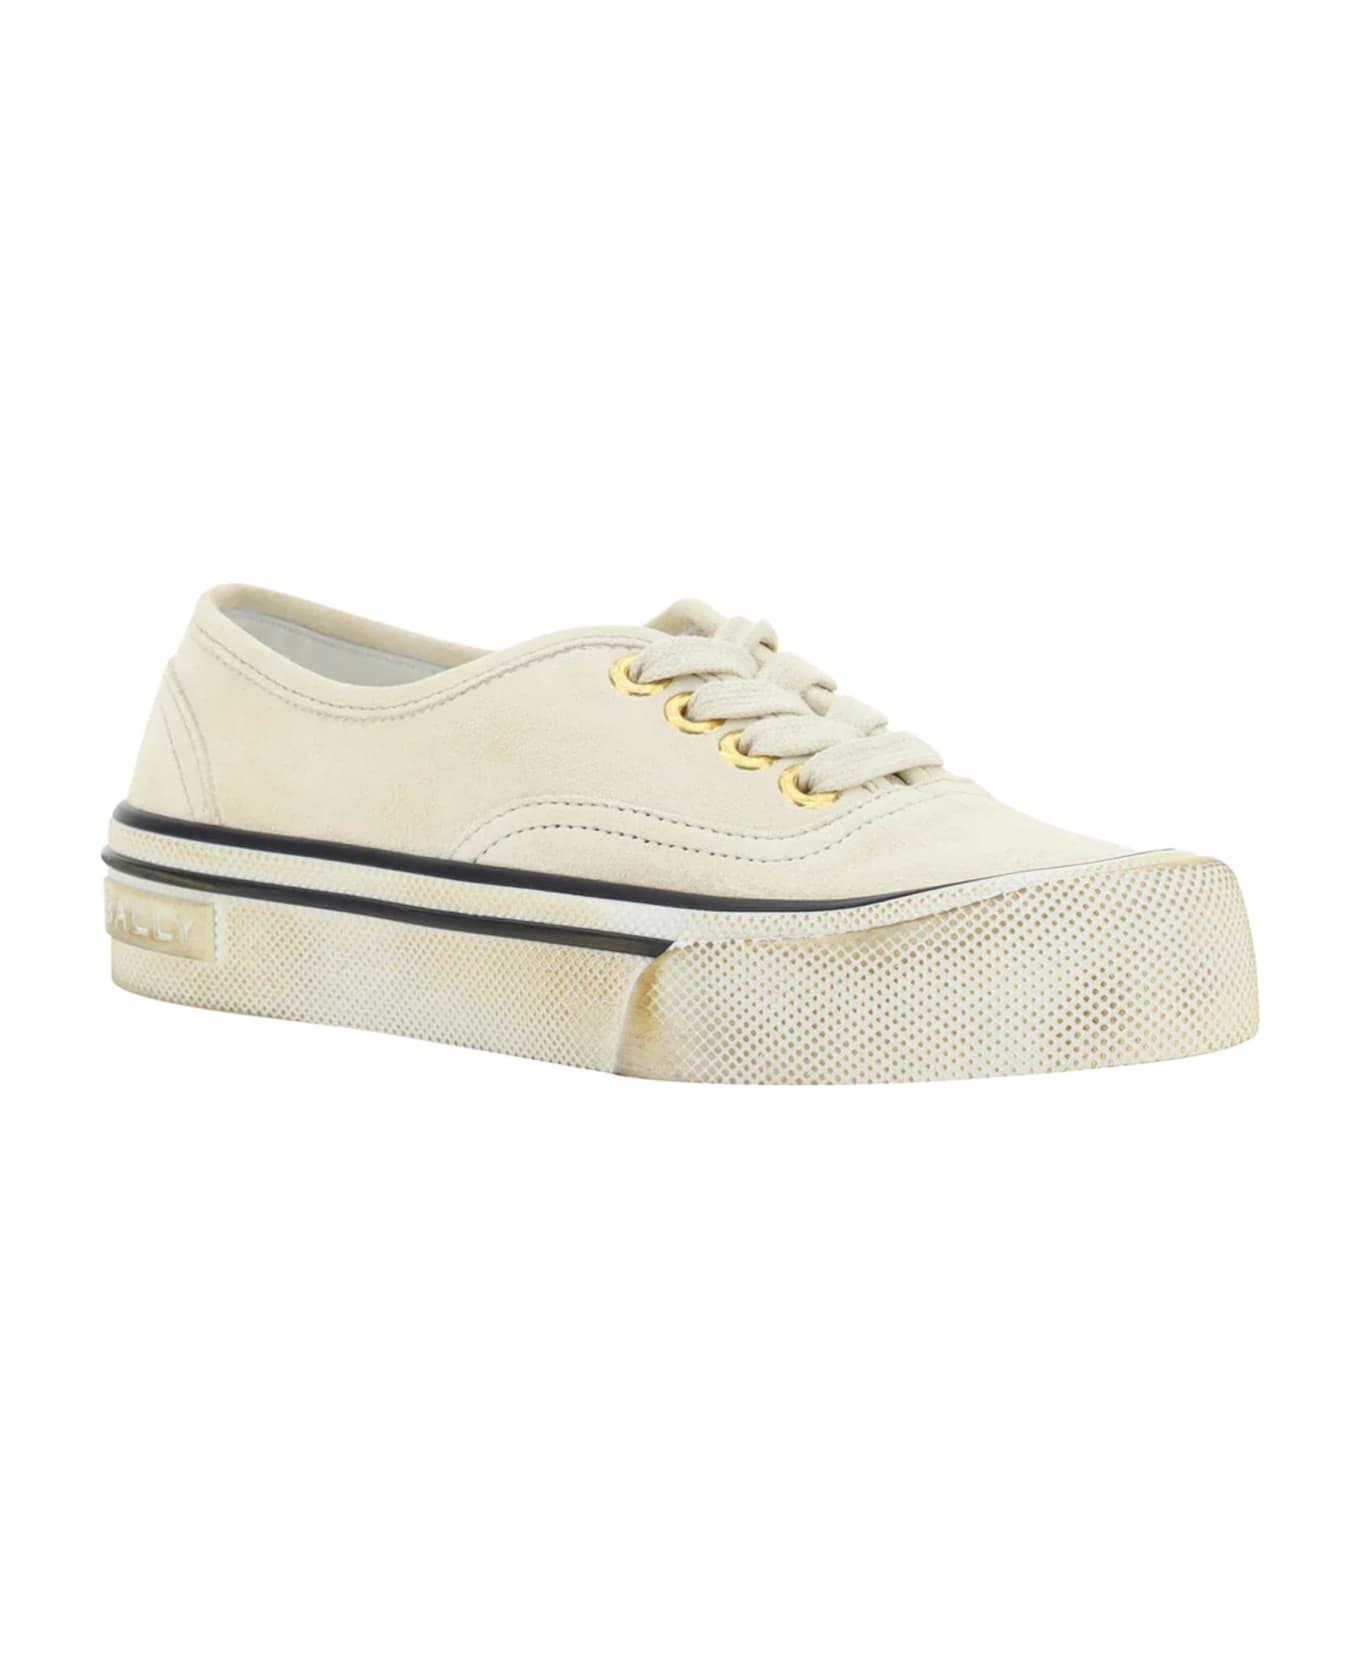 Bally Lyder Leather Sneakers - White